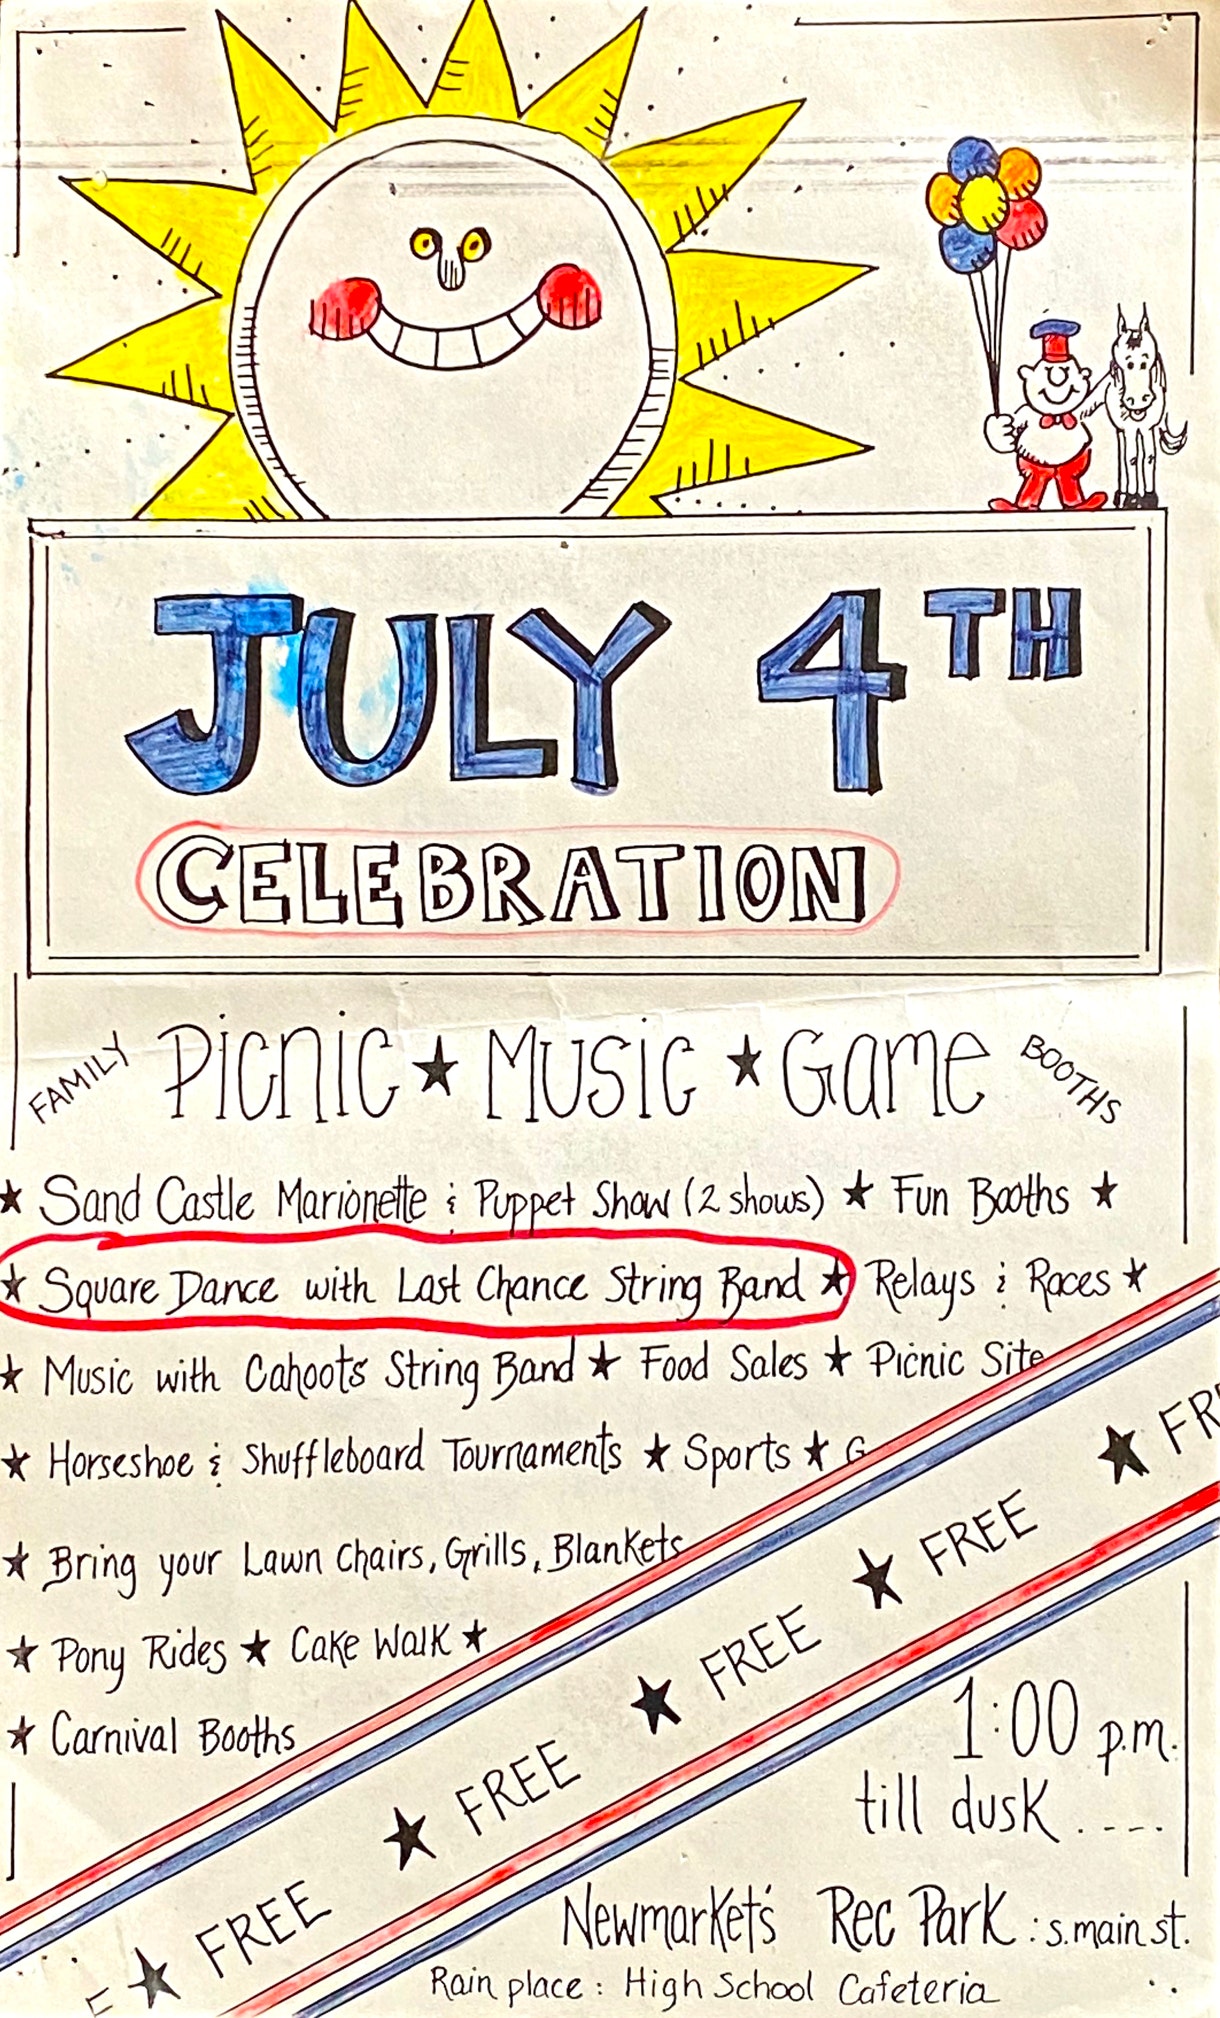 Poster for a Last Chance String Band square dance for the July 4 Celebration in Newmarket, New Hampshire